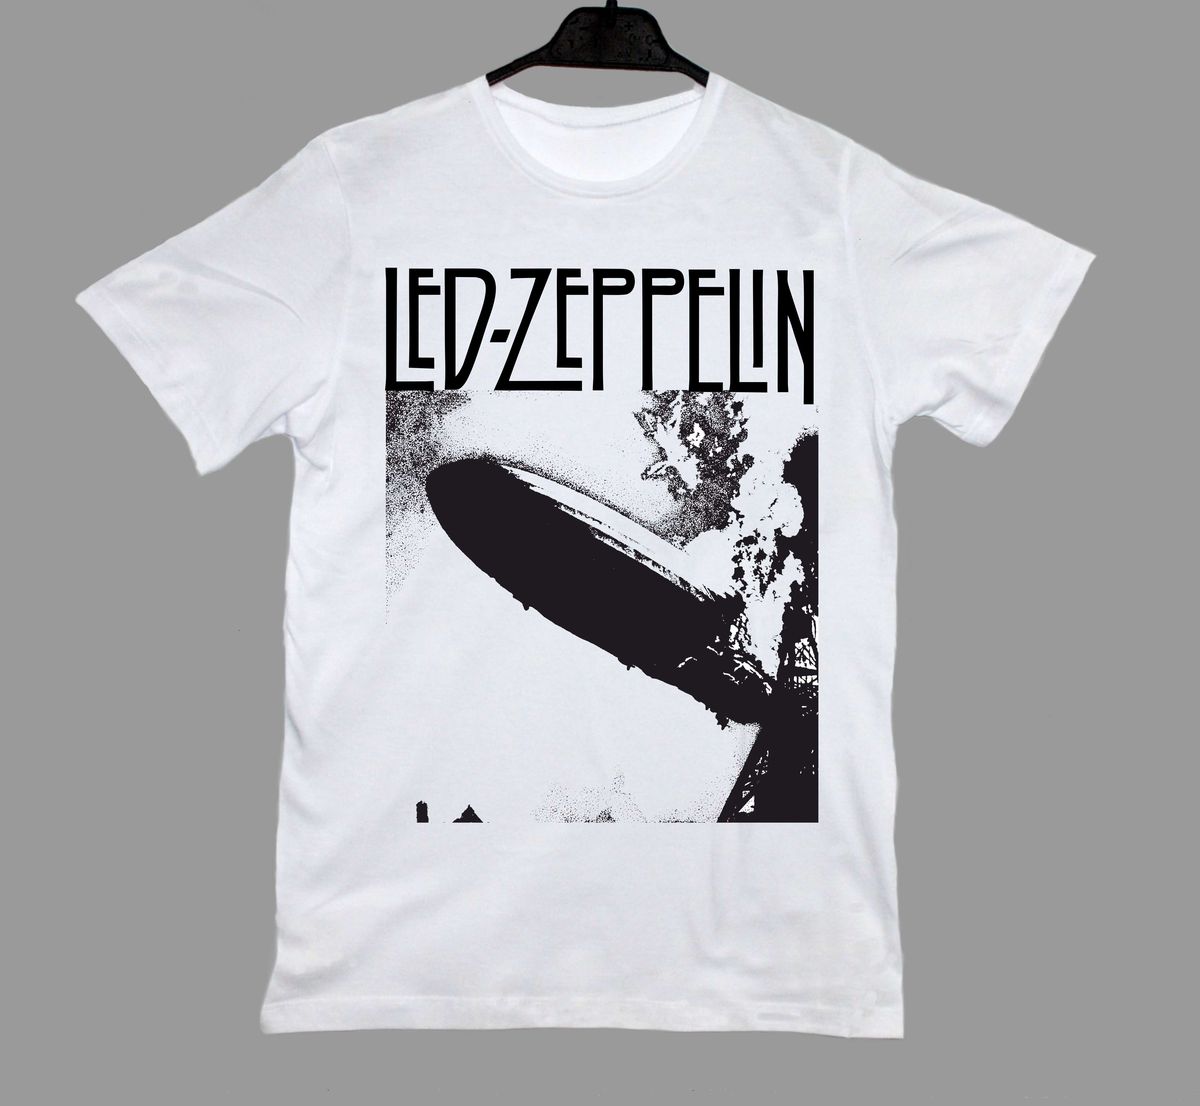 Led Zeppelin White T-Shirt – Metal & Rock T-shirts and Accessories